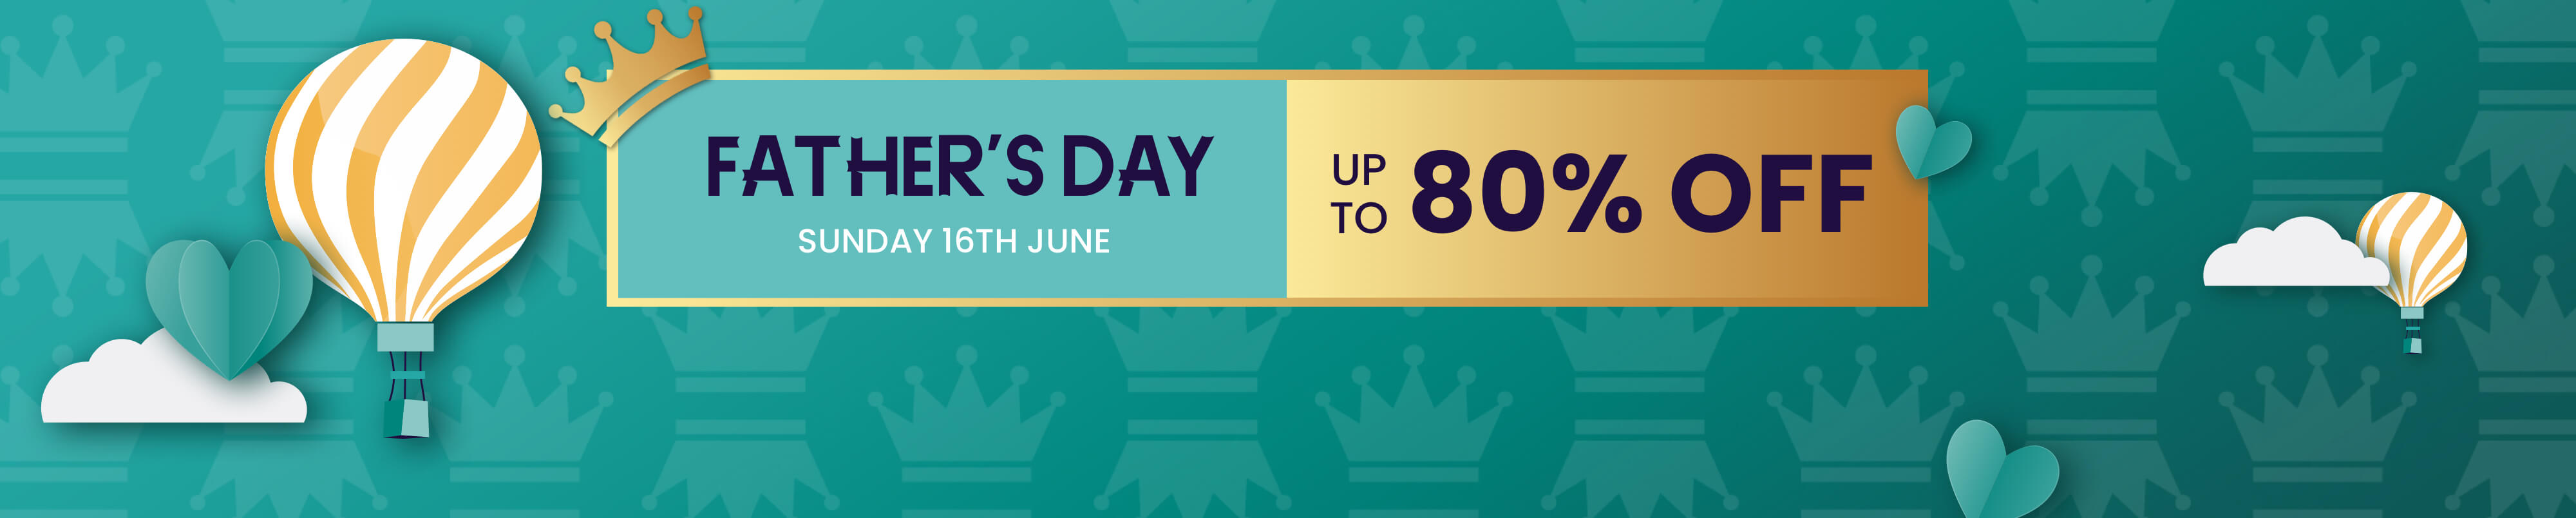 Father's Day | Up to 80% off